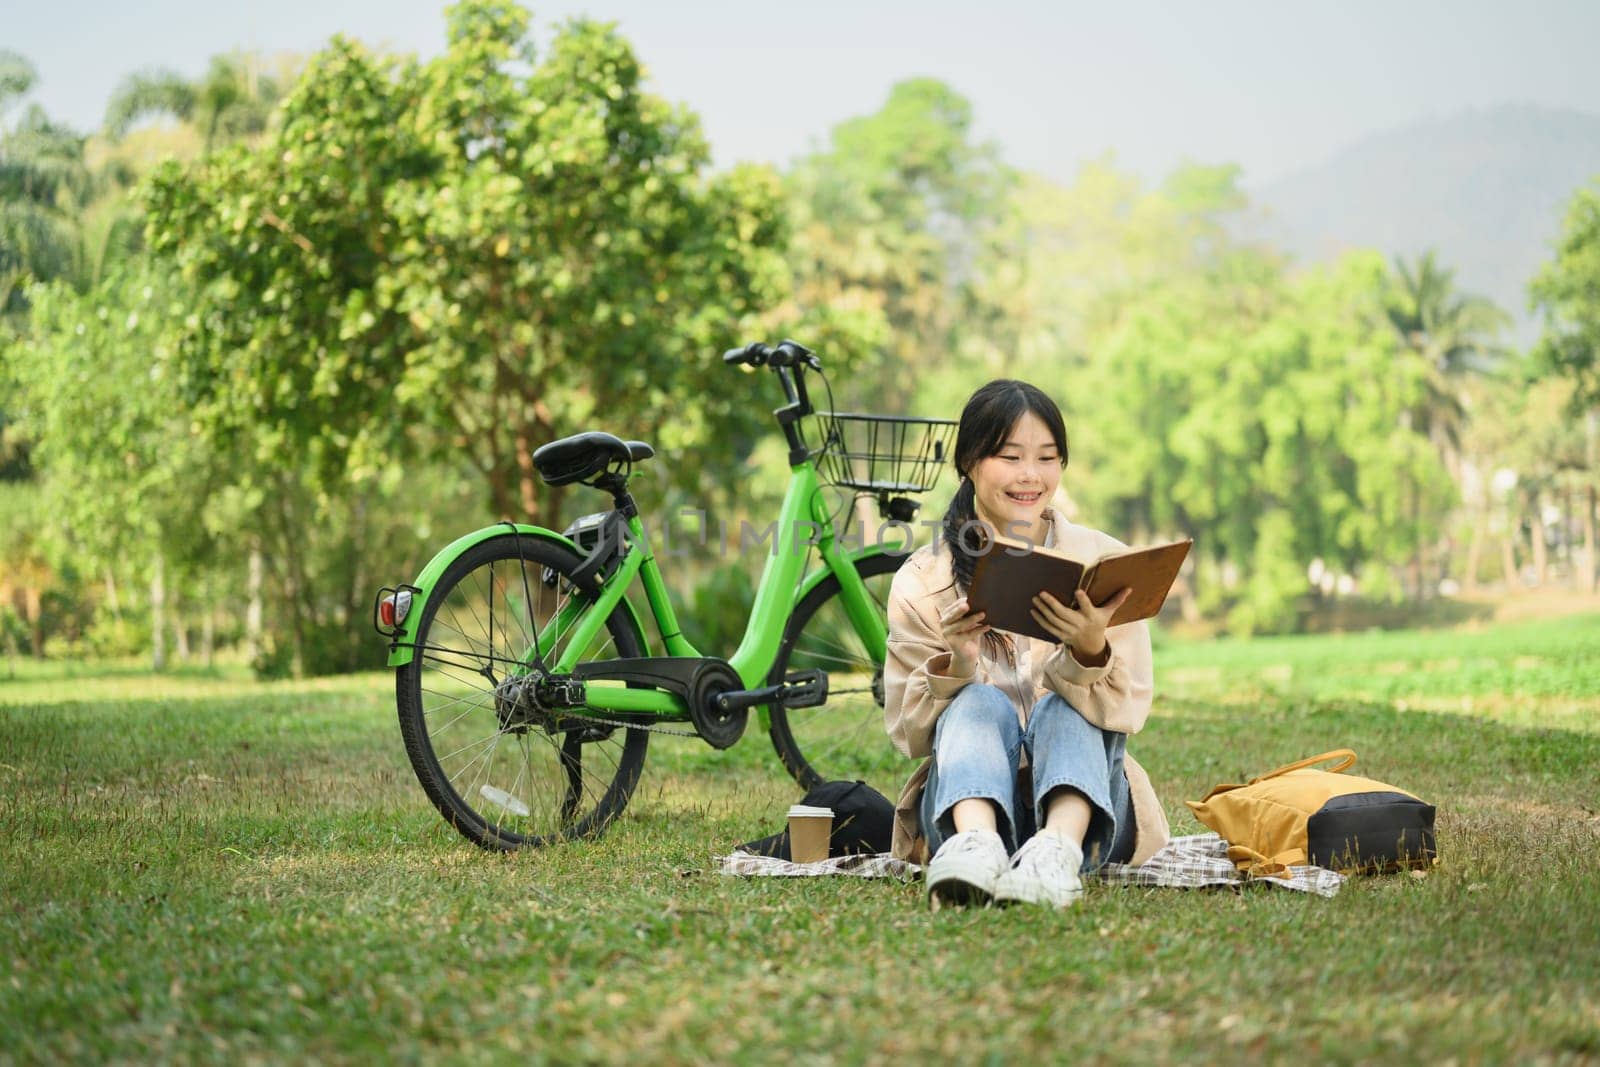 Peaceful young woman relaxing on green grass and reading book during summer day.